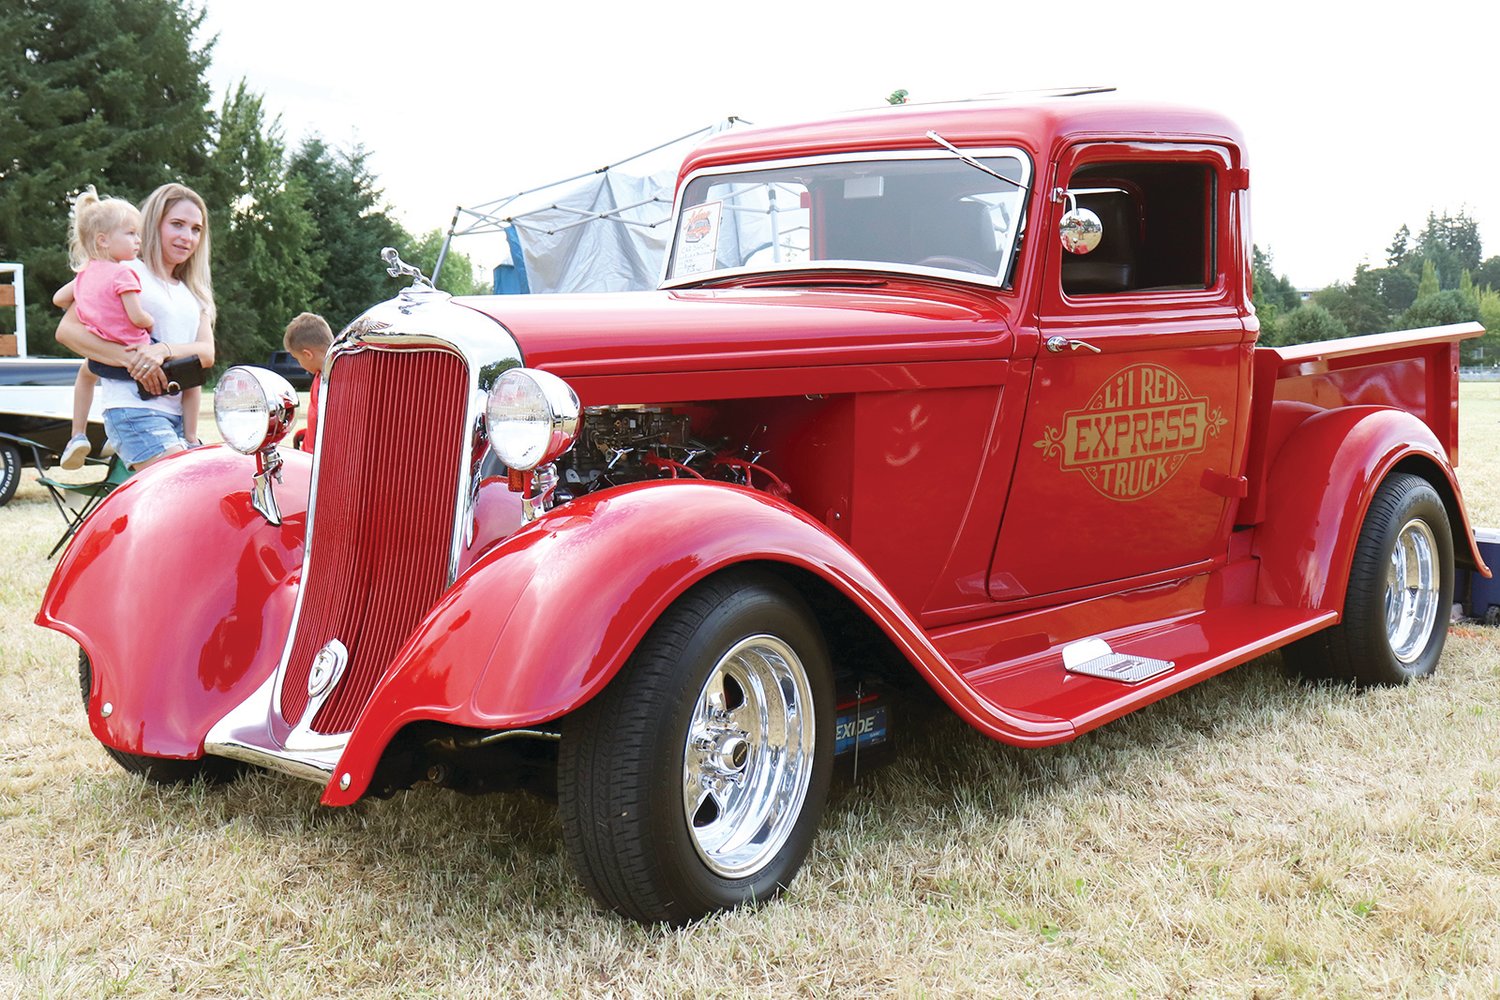 Adna Camp & Cruise Car Show attendees look over a 1935 Dodge Pickup in Adna on Friday.